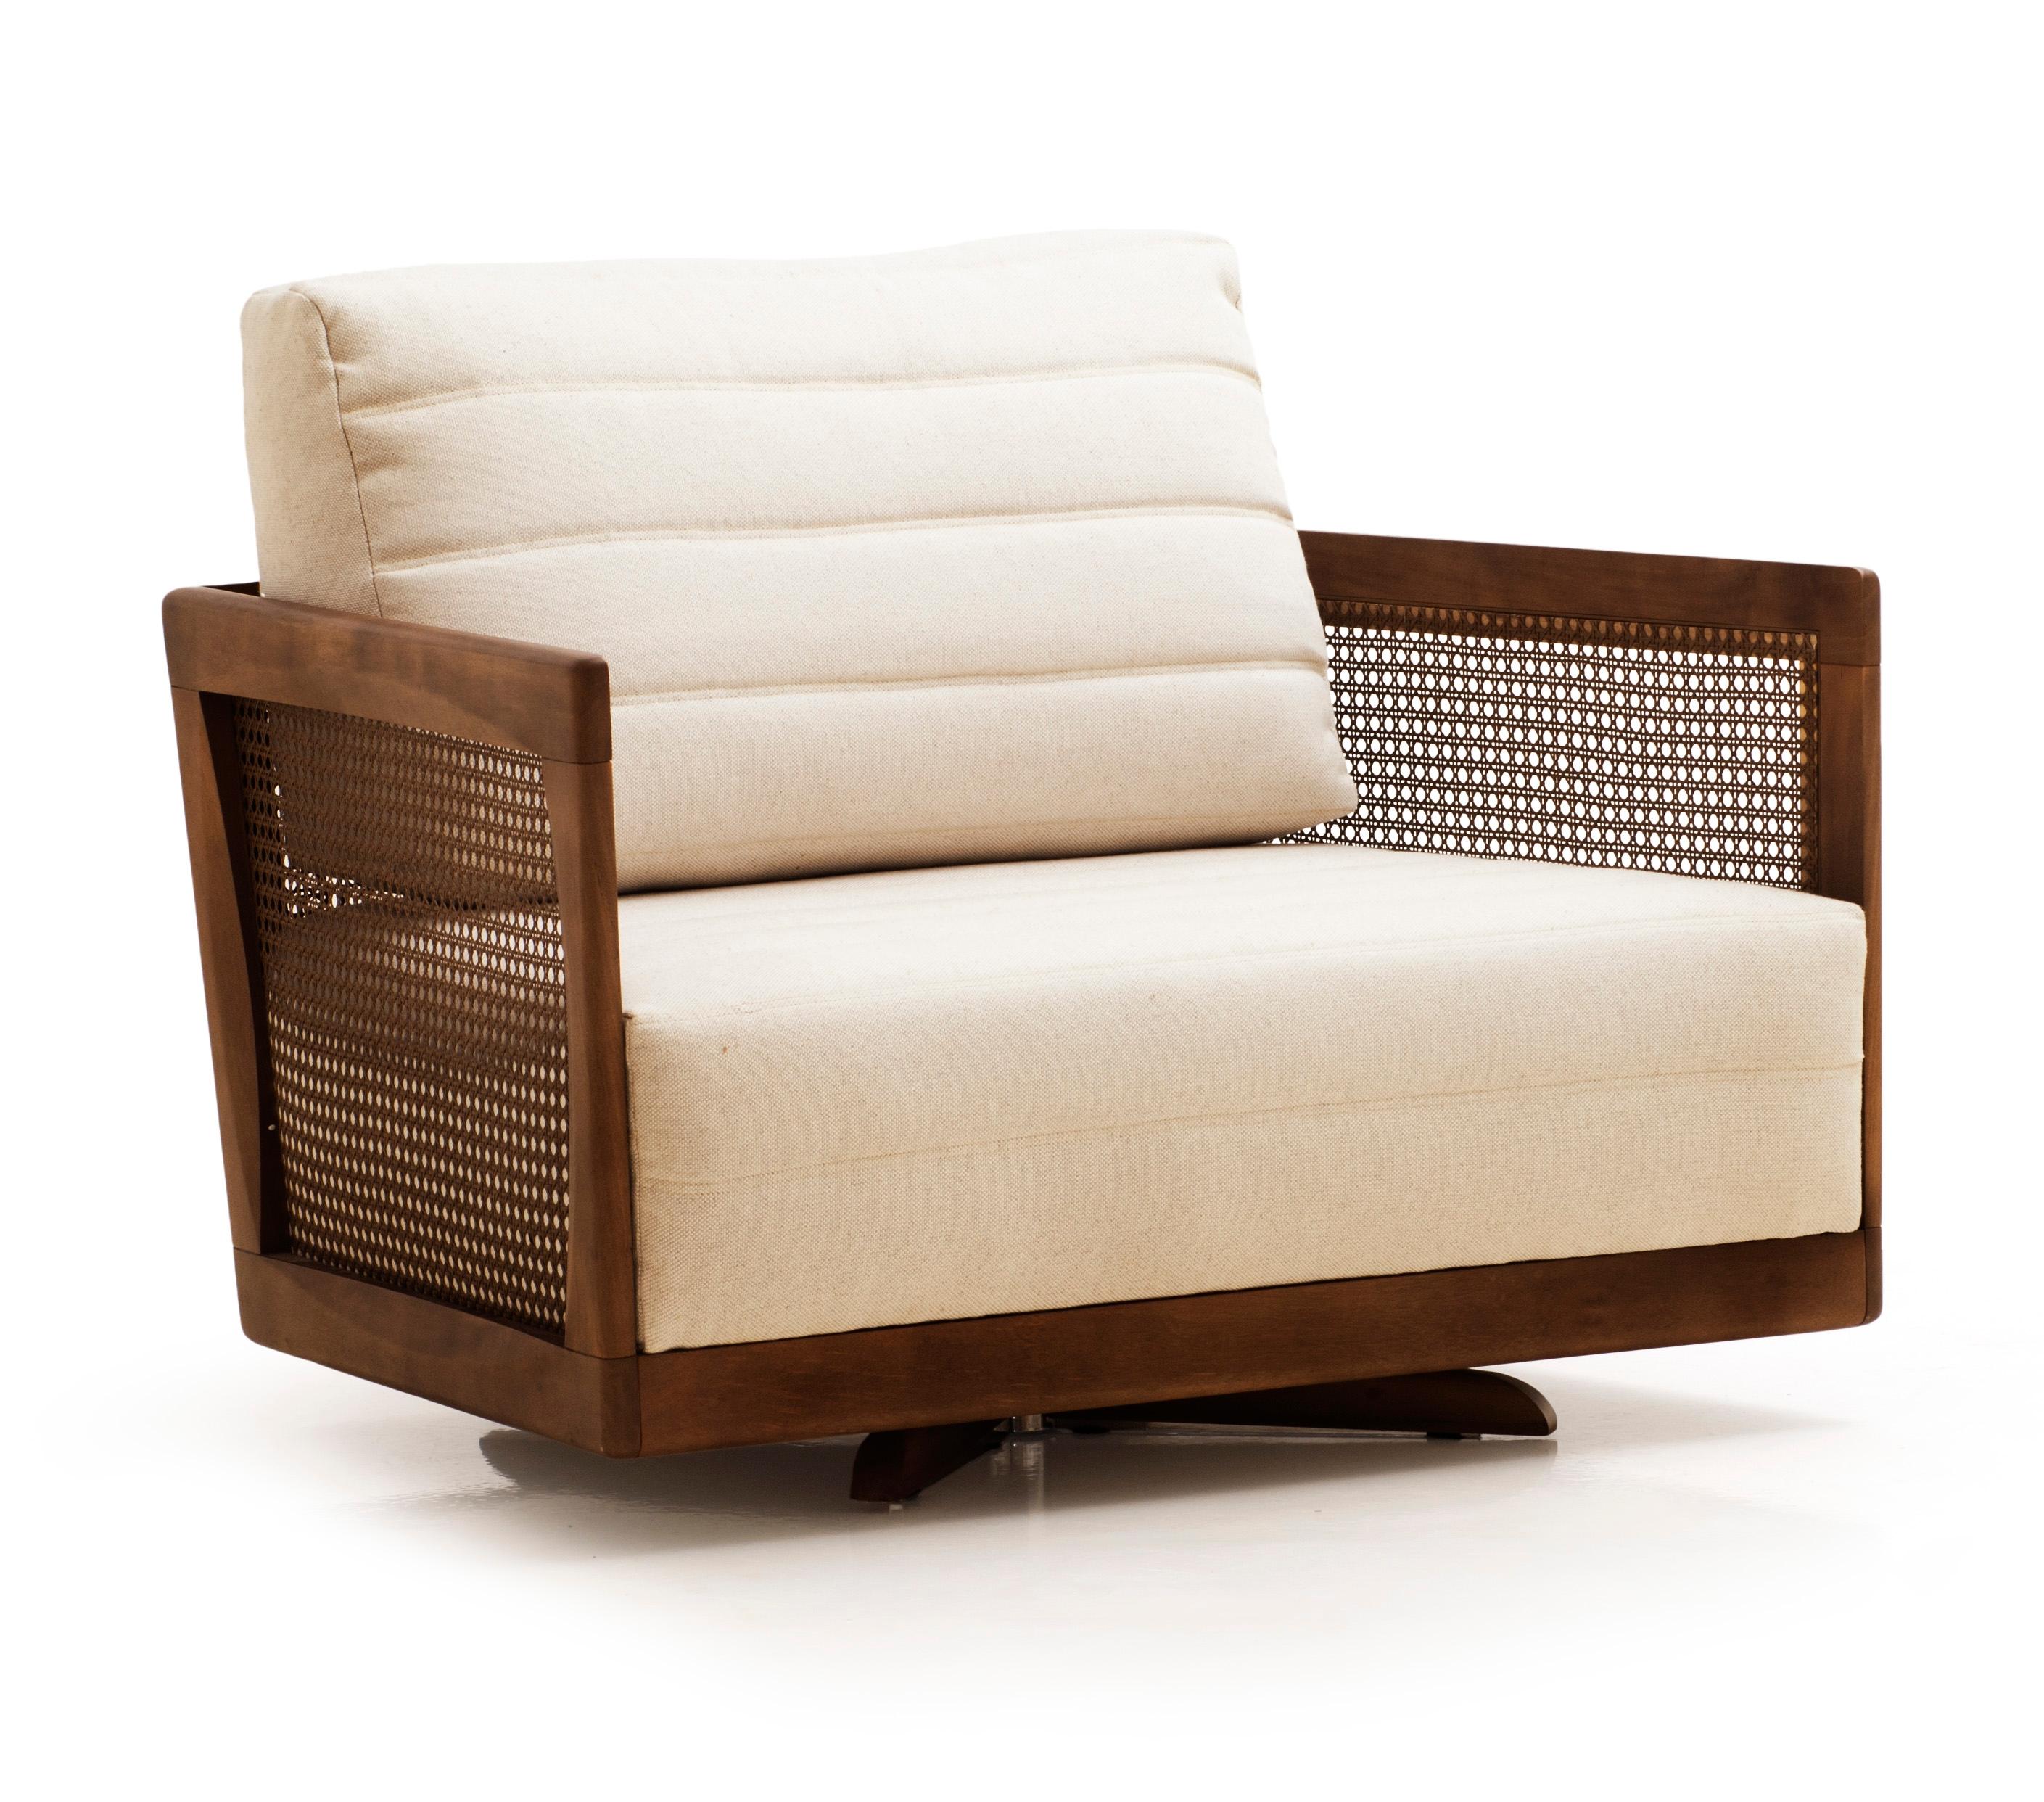 The Flog Swivel Armchair has a design that refers to modern Brazilian furniture. With a hollow solid wood structure that is filled with the traditional and charming straw, it has an extremely comfortable seat and back with a proportion of space and